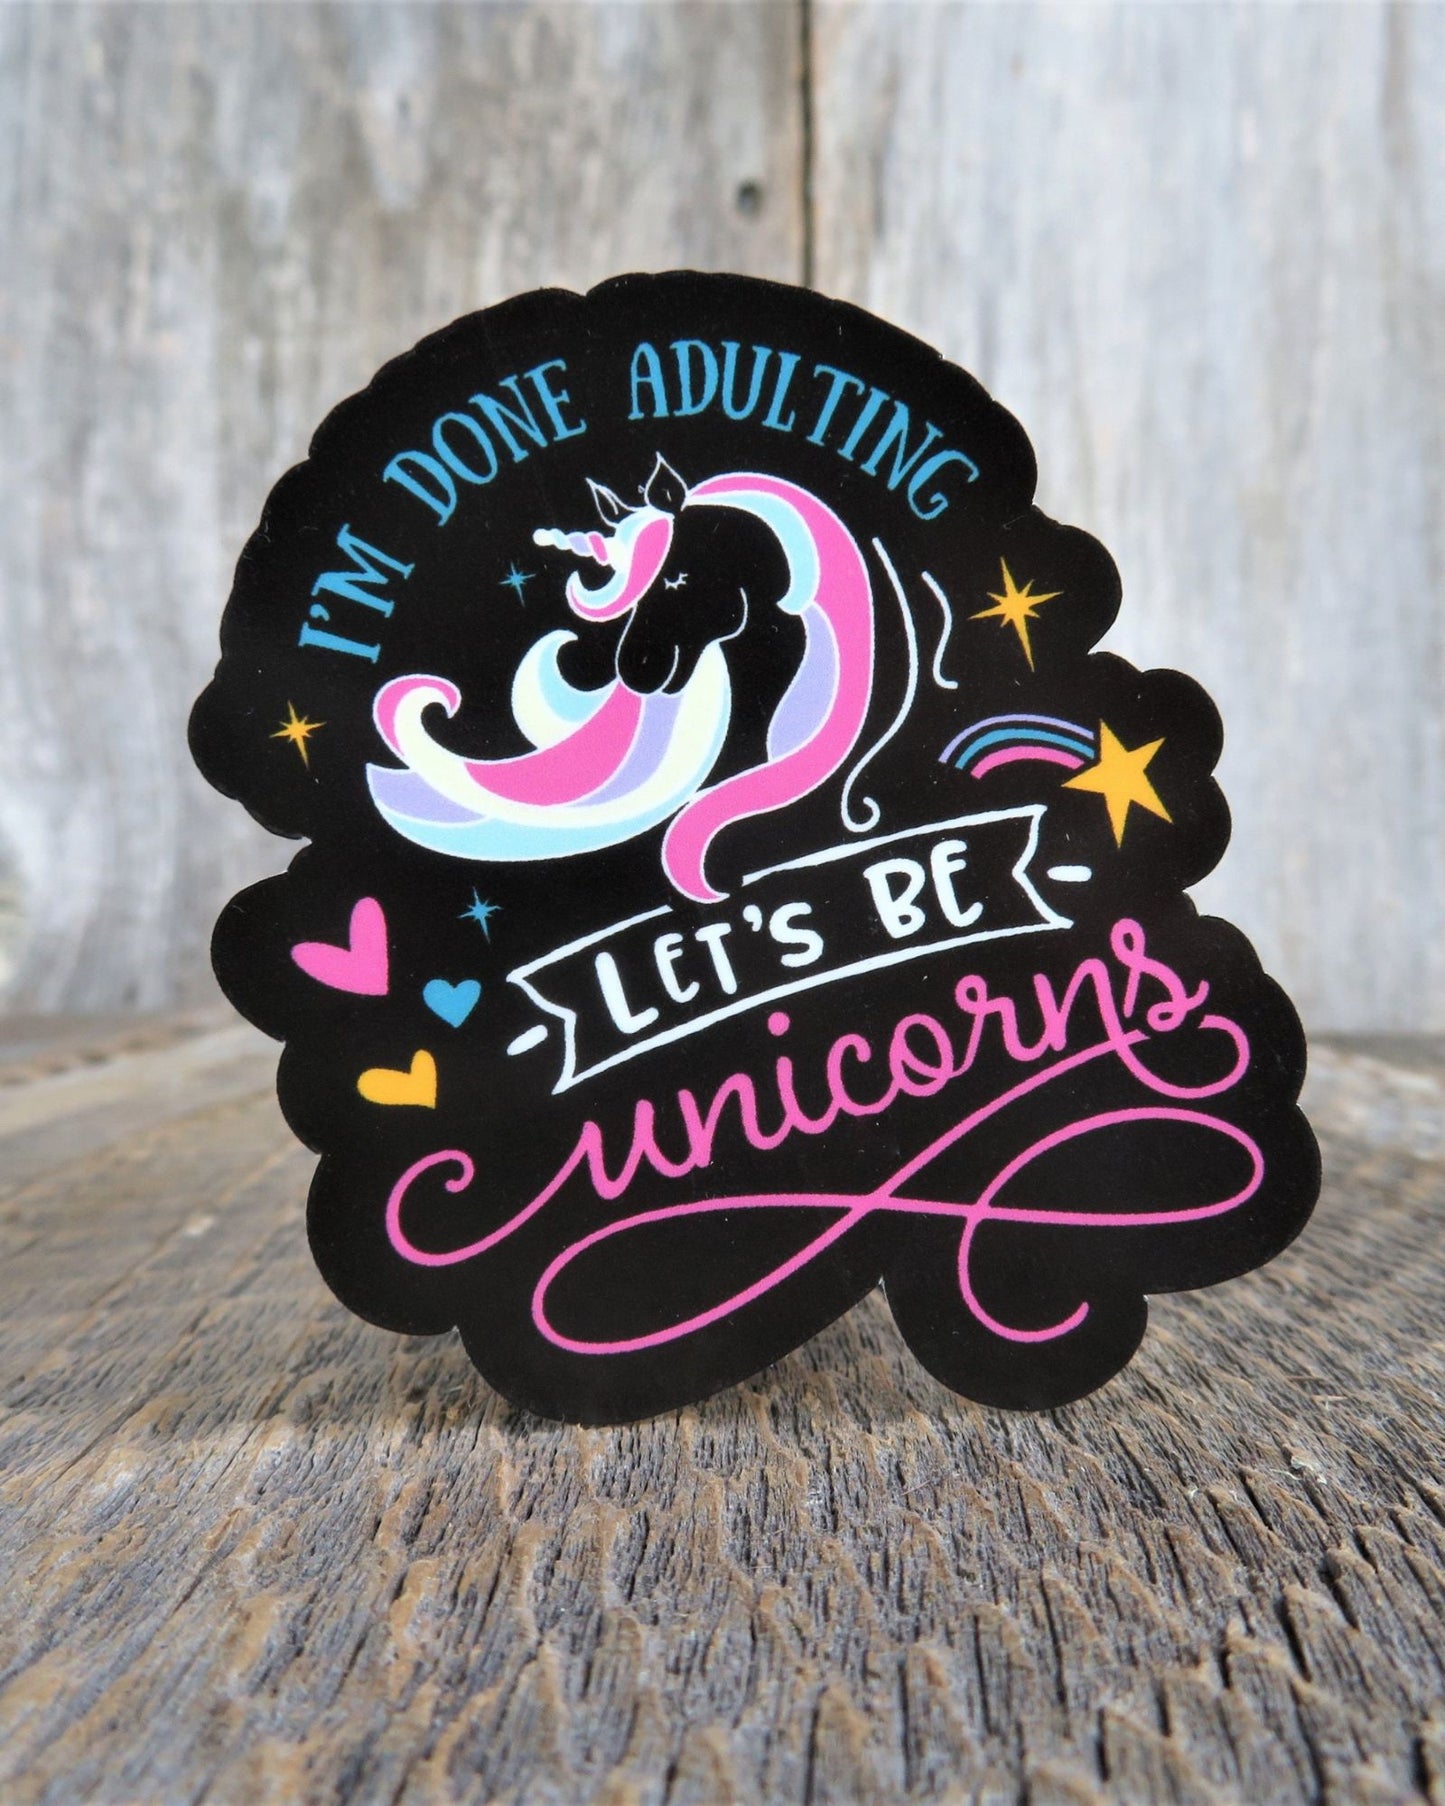 I'm Done Adulting Let's Be Unicorns Sticker Funny Sarcastic Fantasy Waterproof Travel Water Bottle Laptop